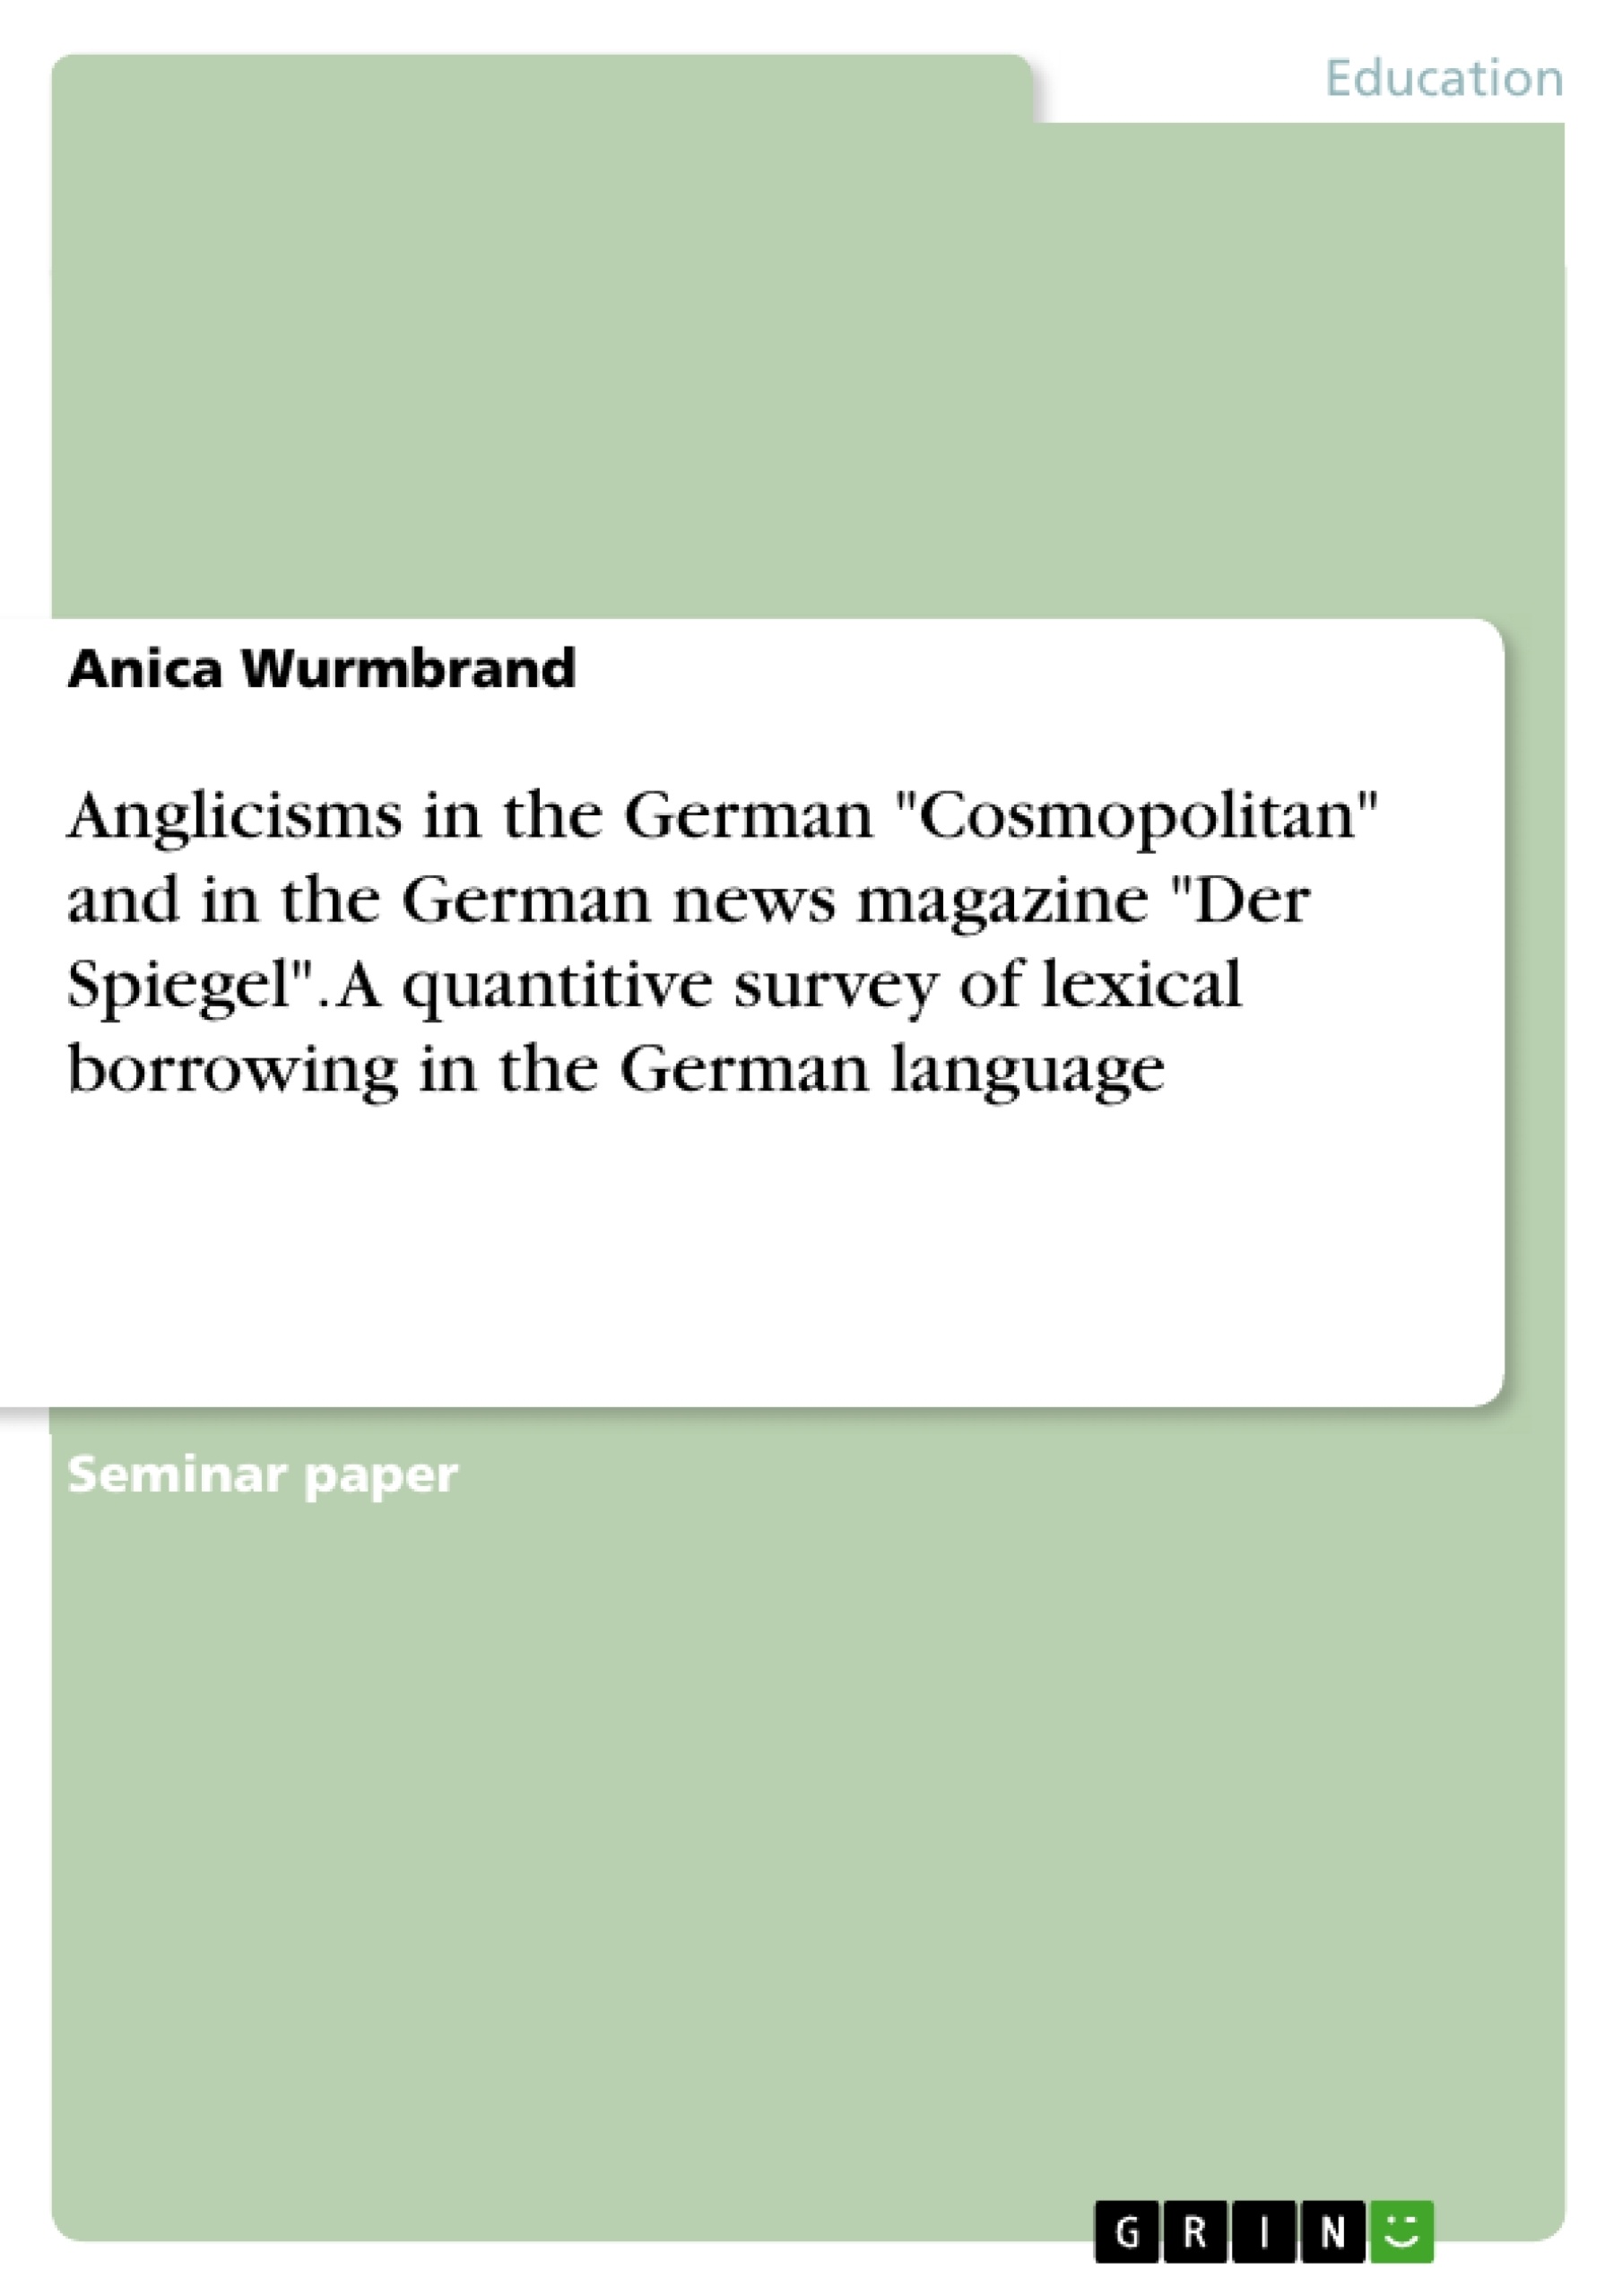 Titre: Anglicisms in the German "Cosmopolitan" and in the German news magazine "Der Spiegel".  A quantitive survey of lexical borrowing in the German language